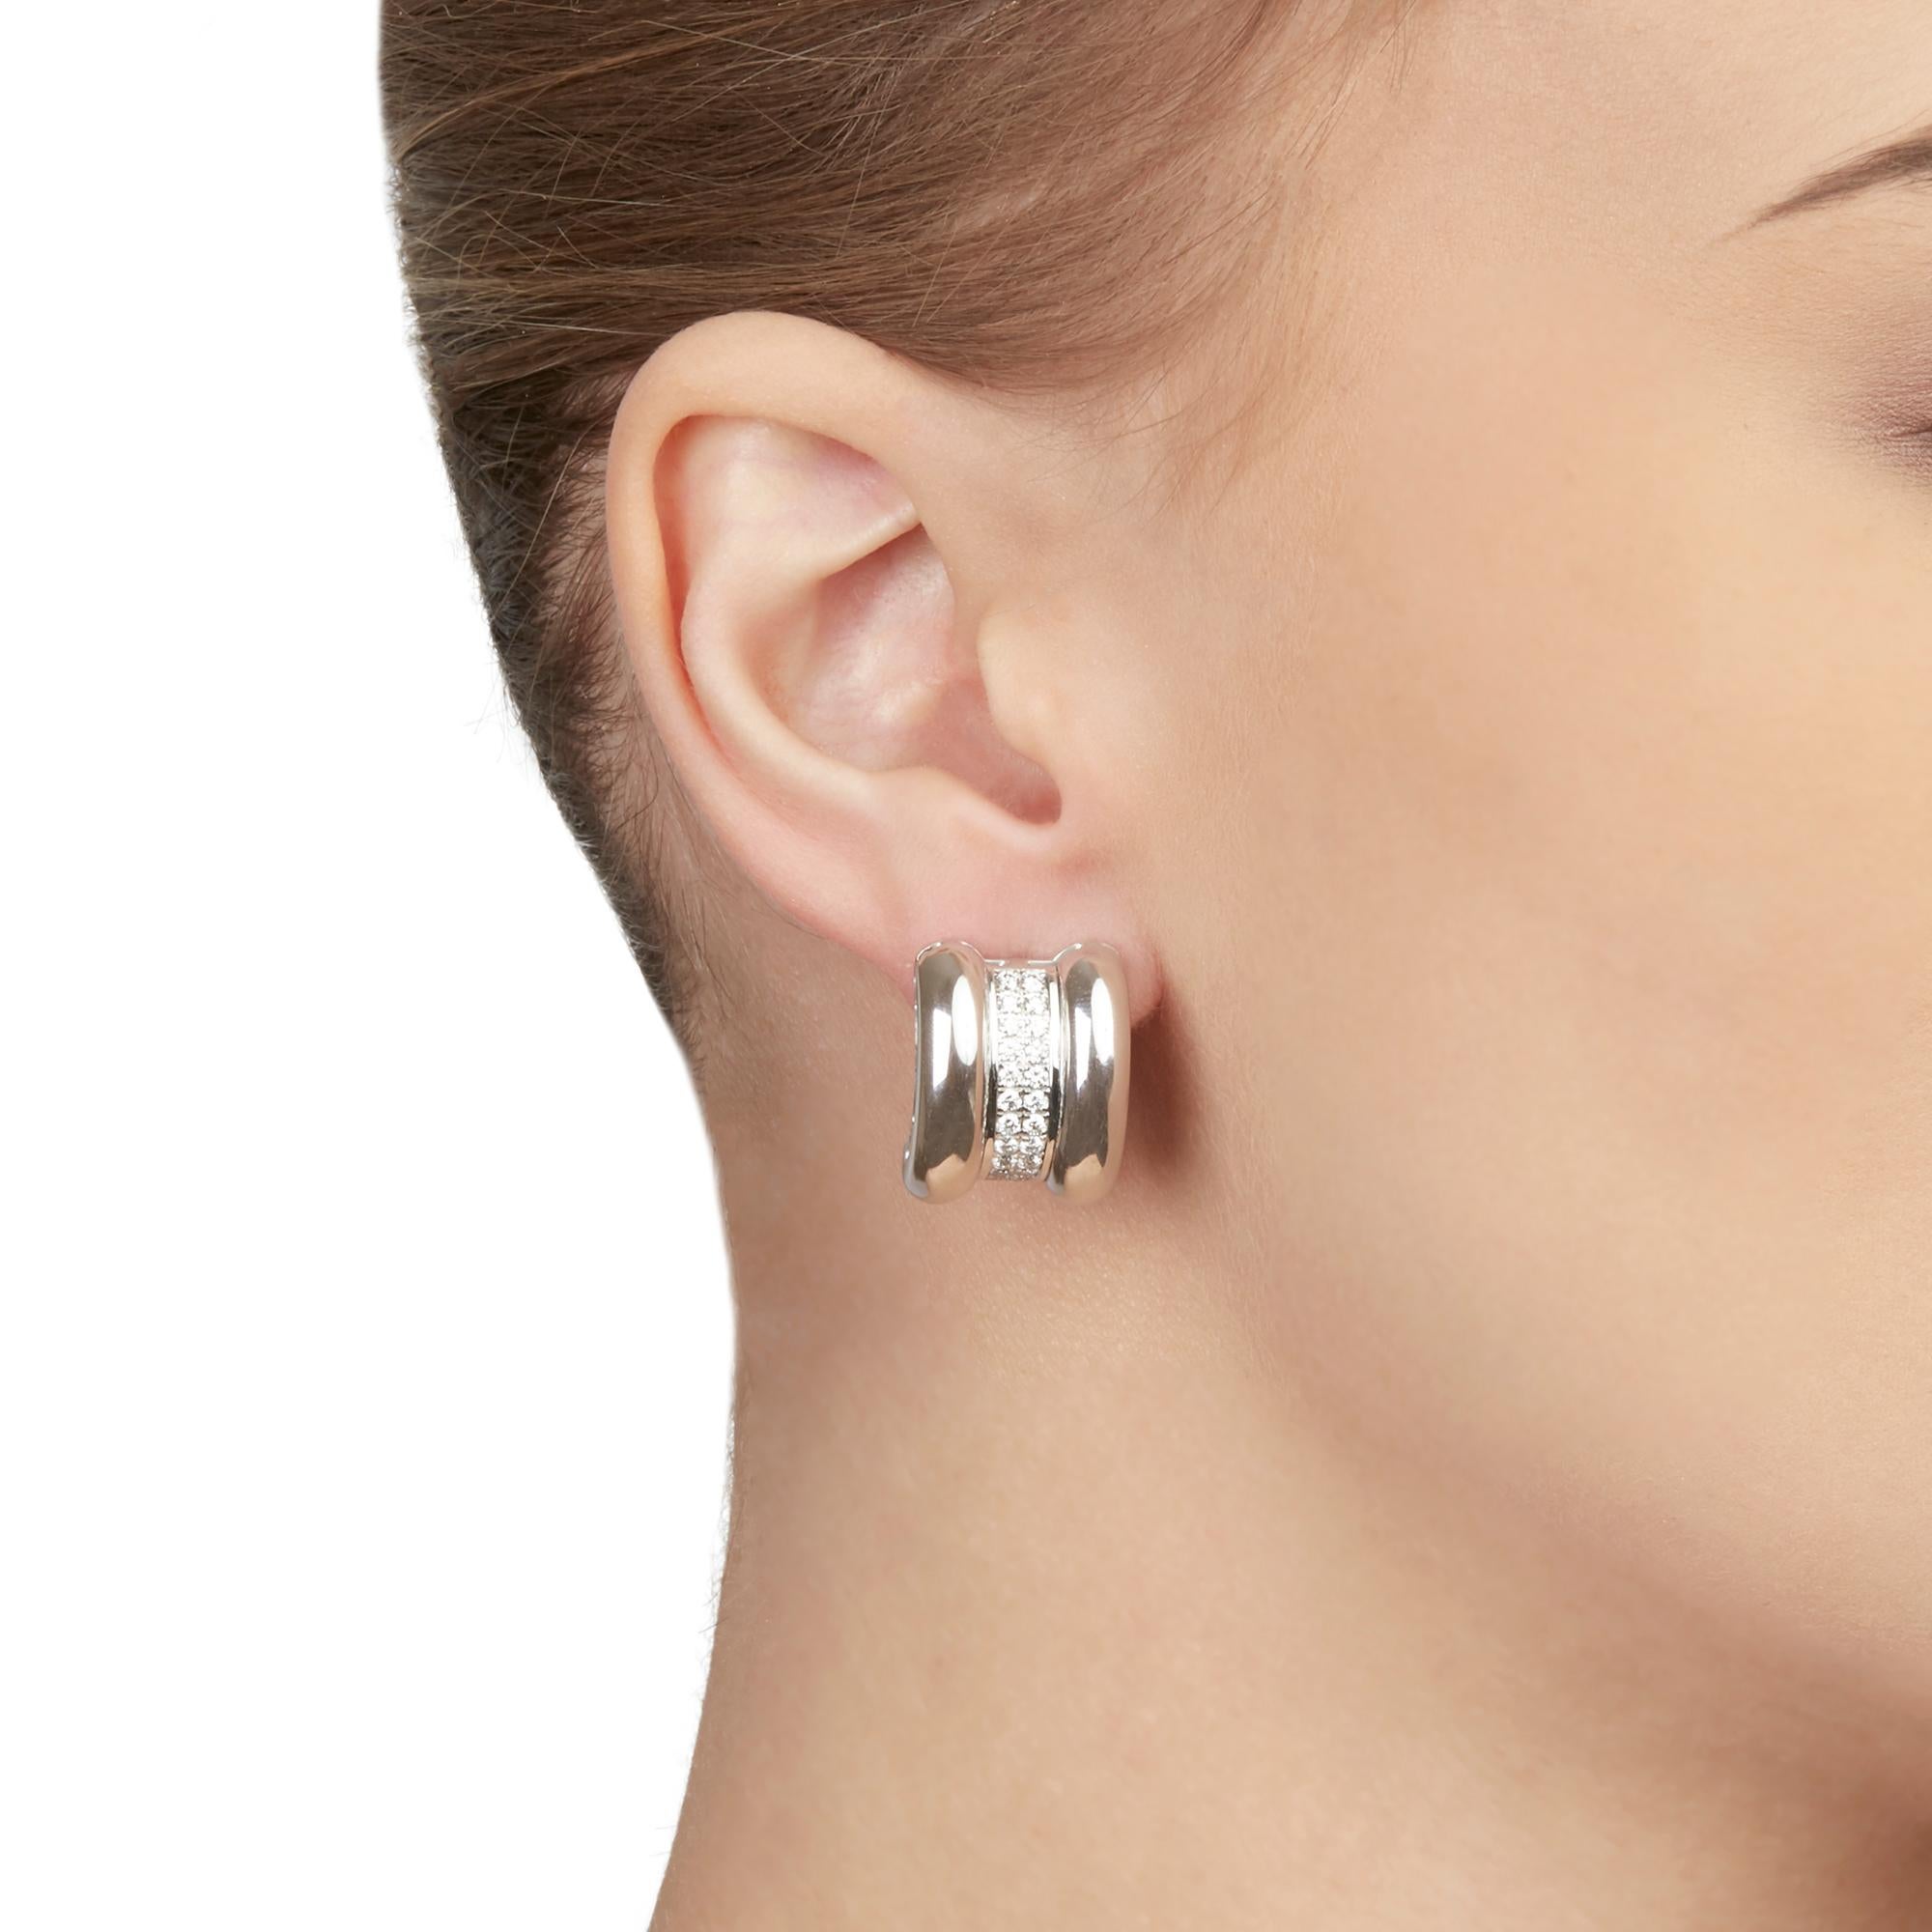 These Earrings by Chopard are from their La Strada collection and feature 44 round brilliant cut Diamonds of 0.92ct total colour G, clarity VS, made in 18k White Gold. These Earrings have secure omega backs. Complete with Chopard Box, Manuals &